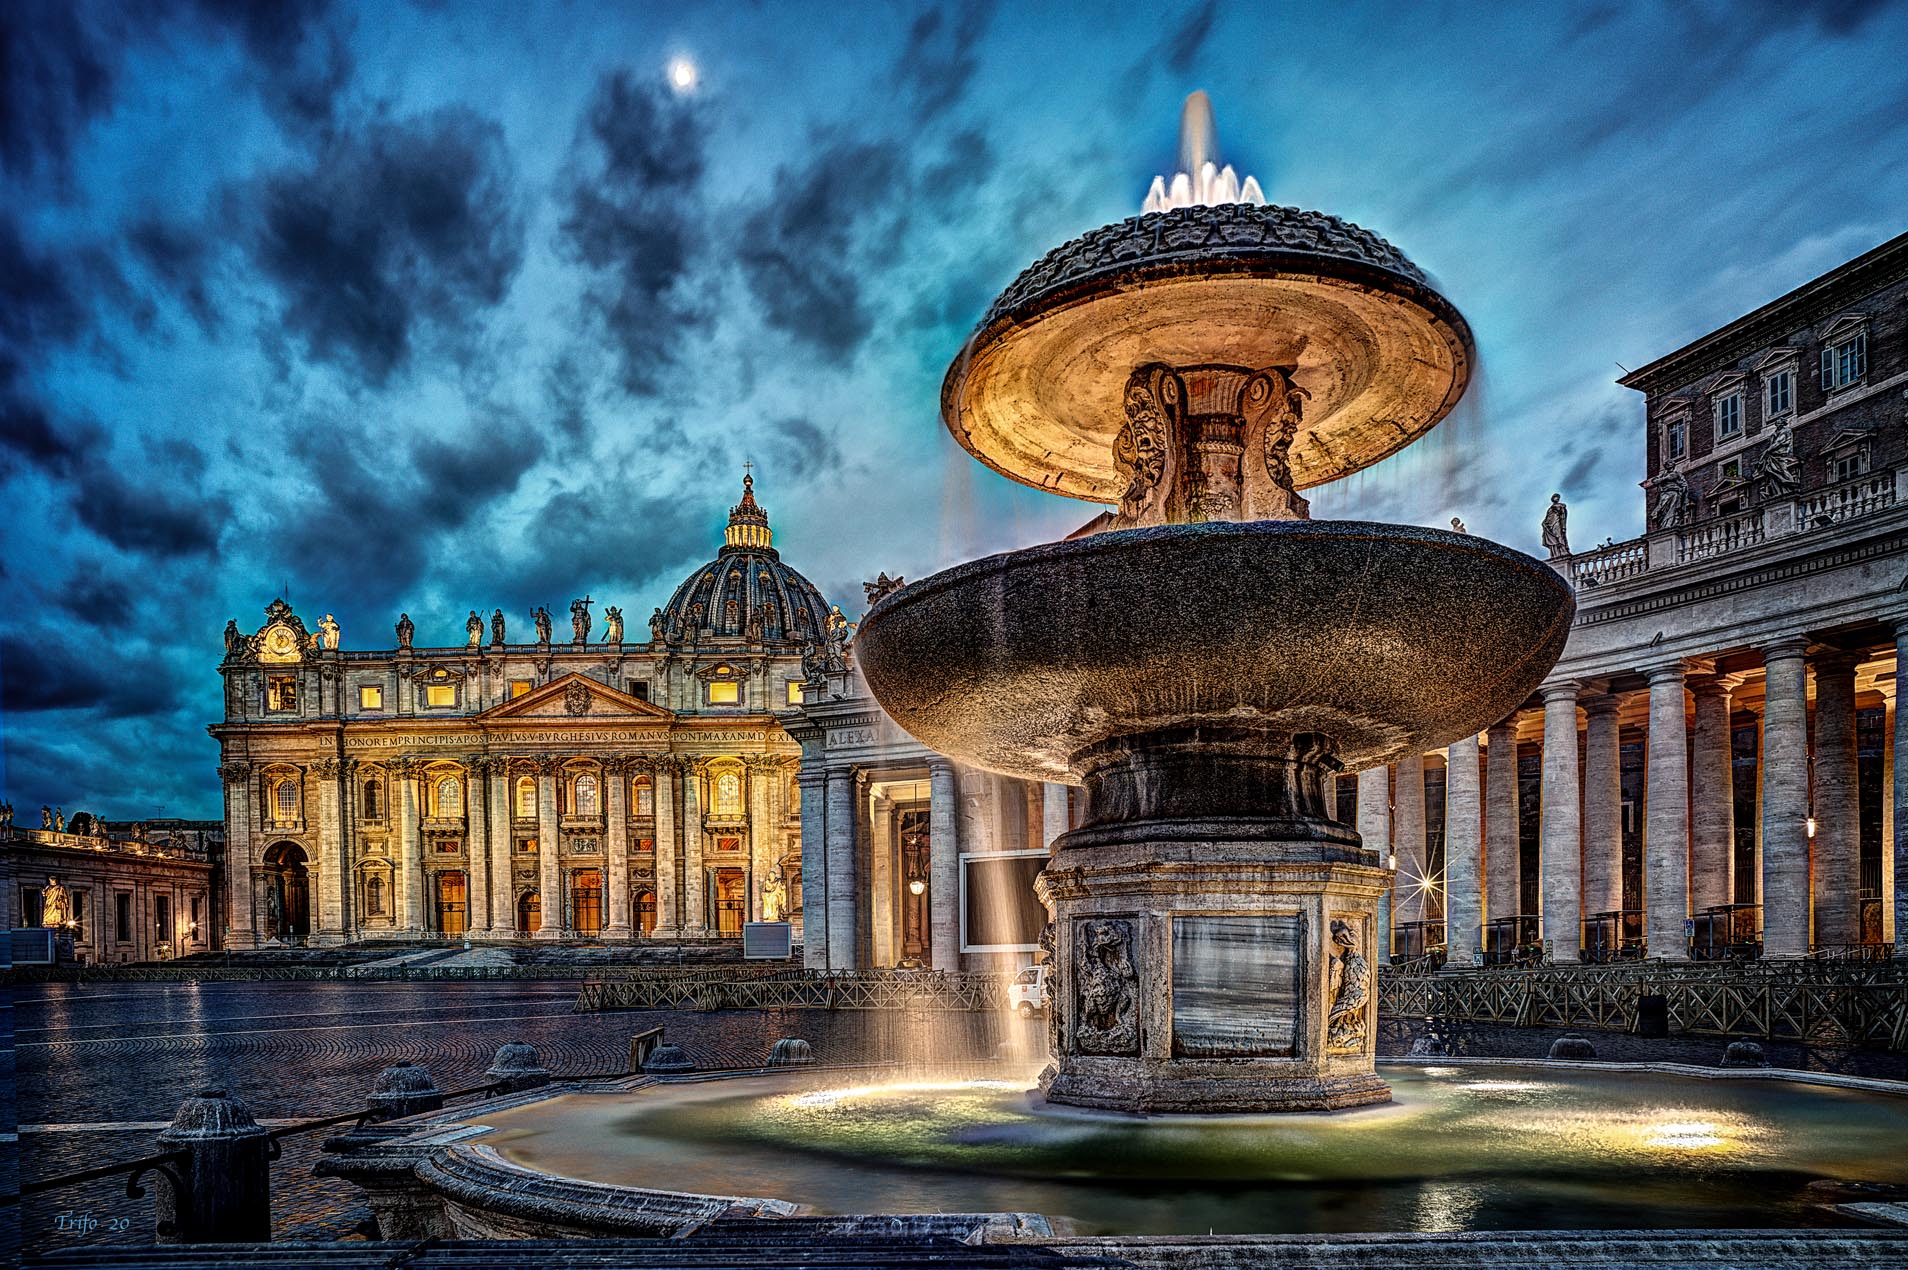 Fountain in St. Peter's Square...